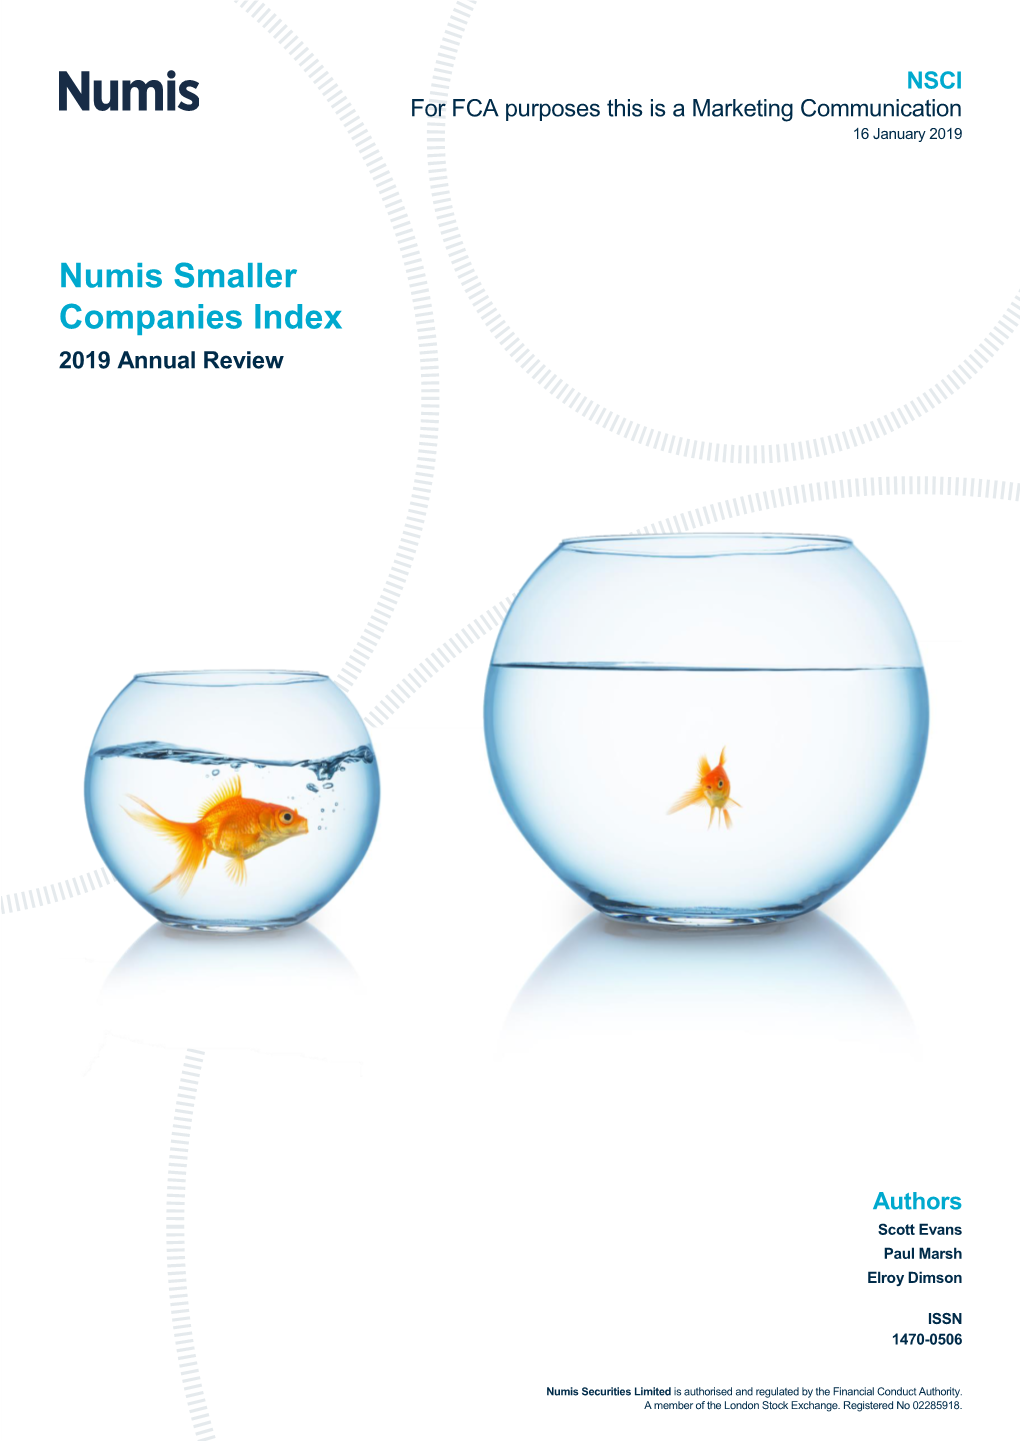 Numis Smaller Companies Index: 2019 Annual Review